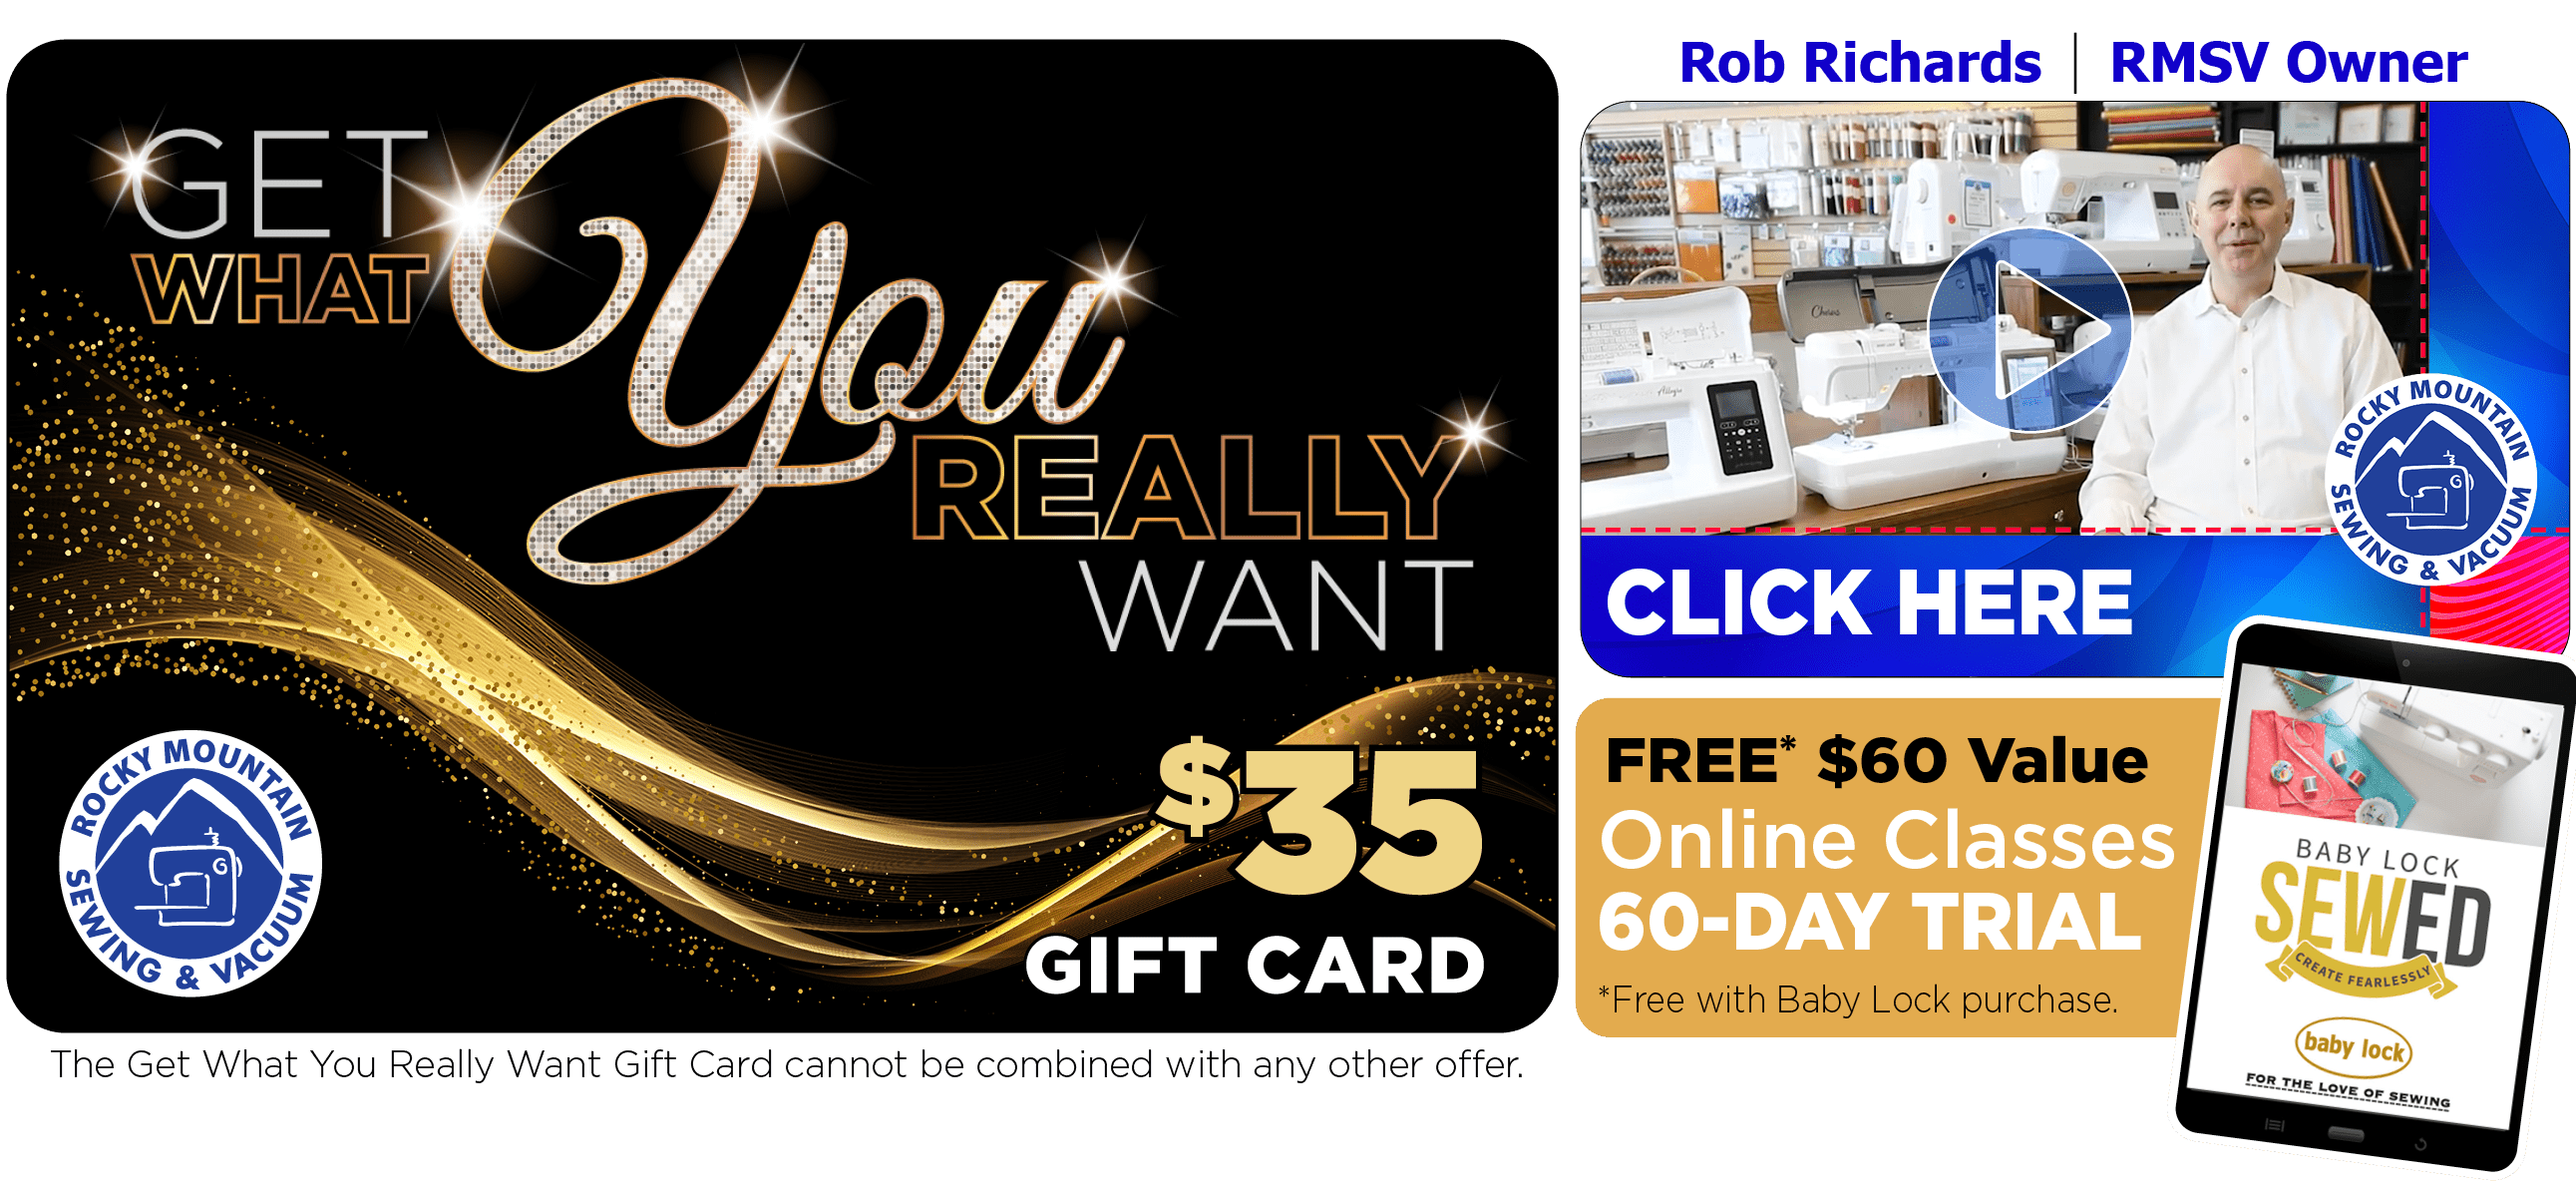 Get What You Really Want $35 Gift Card with Purchase